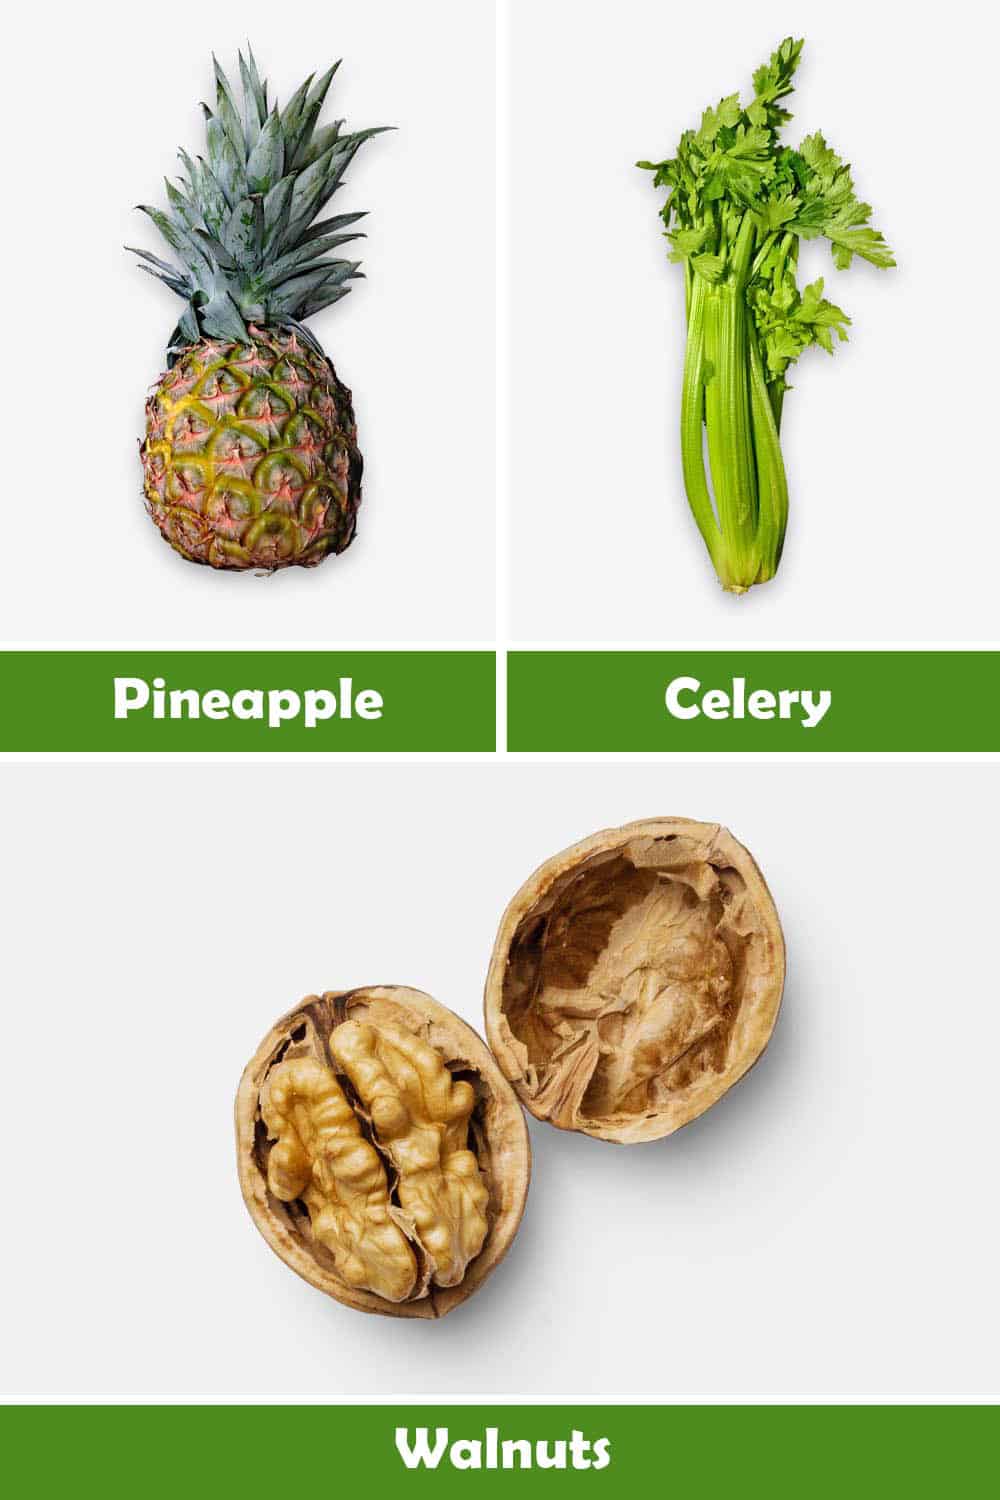 PINEAPPLE, CELERY AND WALNUTS